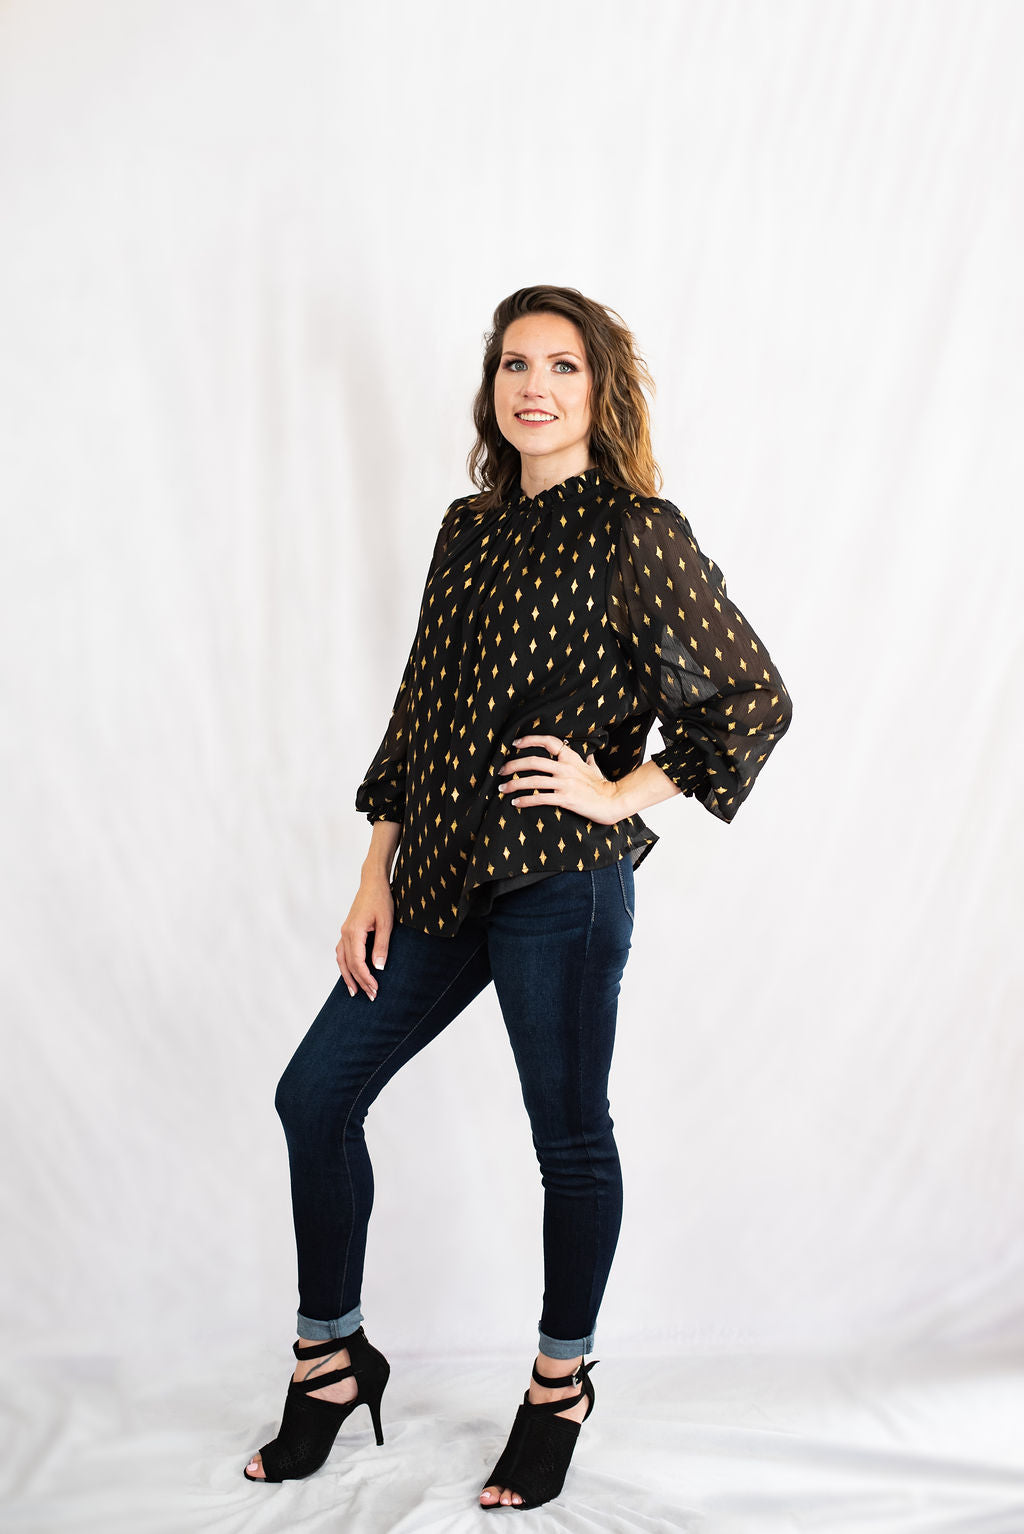 Reflective Foil Print Long Sleeve Top by Jodifl Clothing